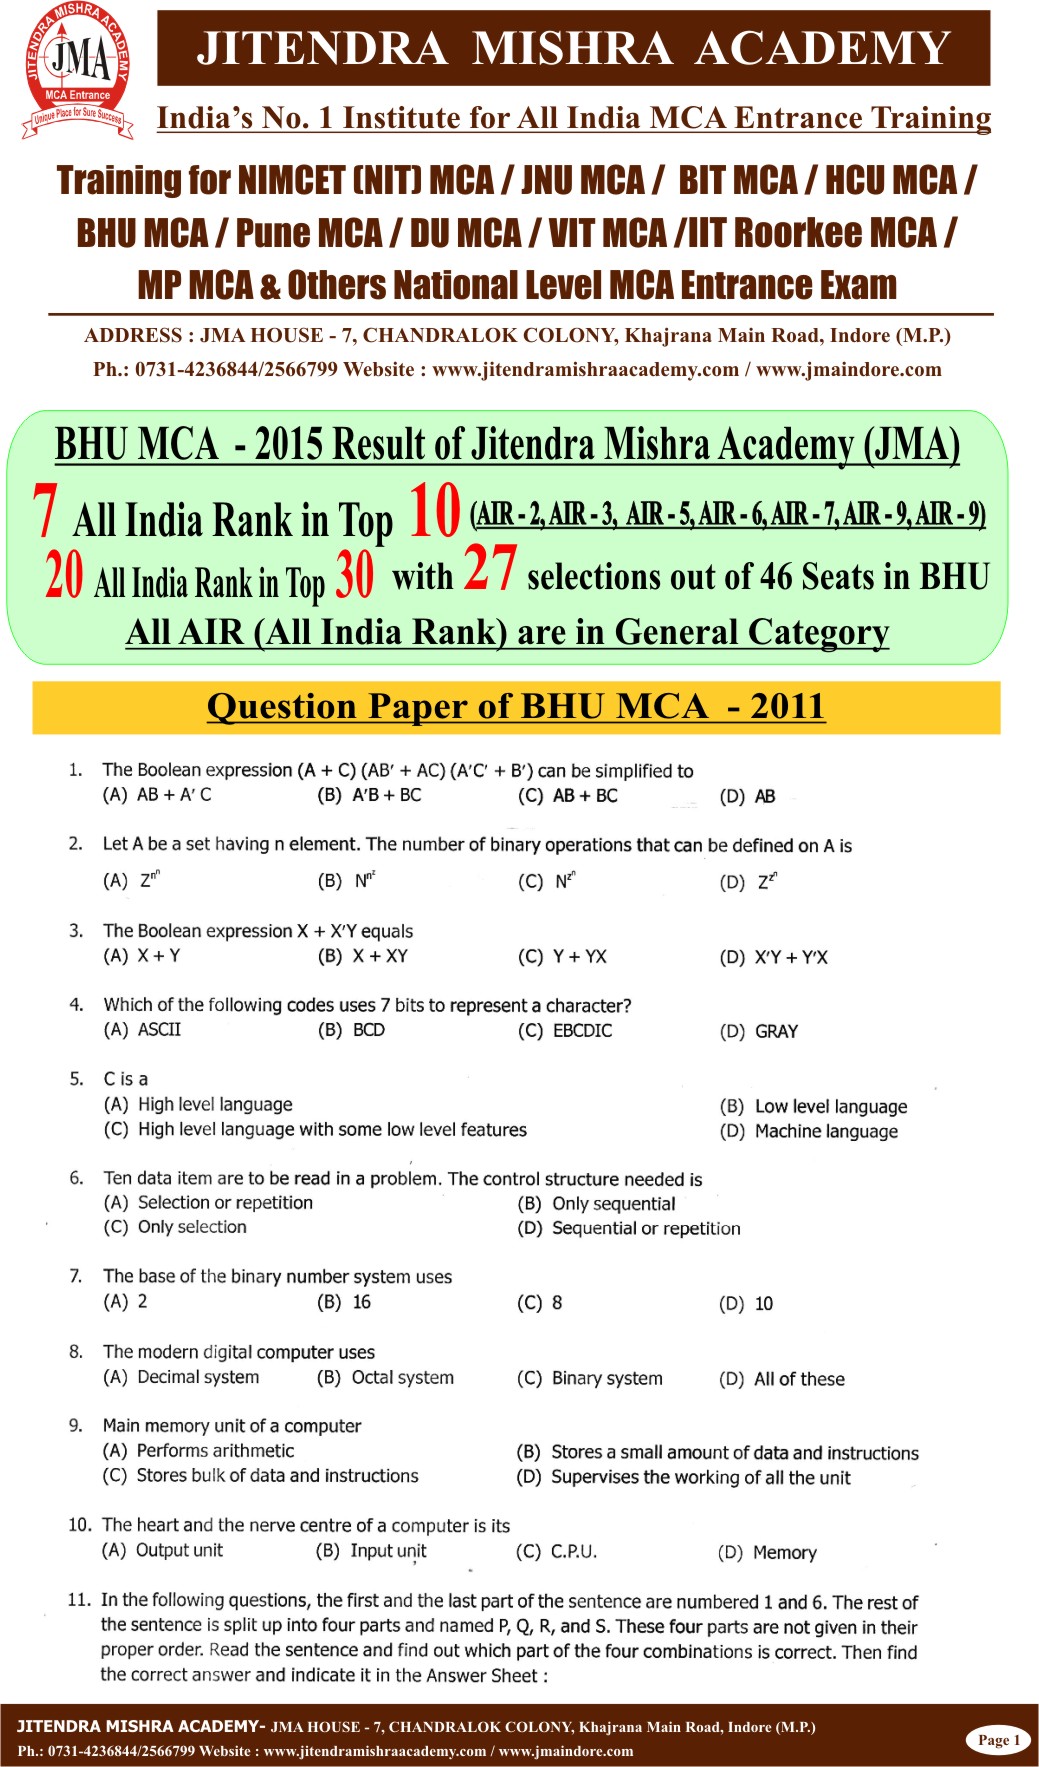 BHU - 2011 (FIRST PAGE)